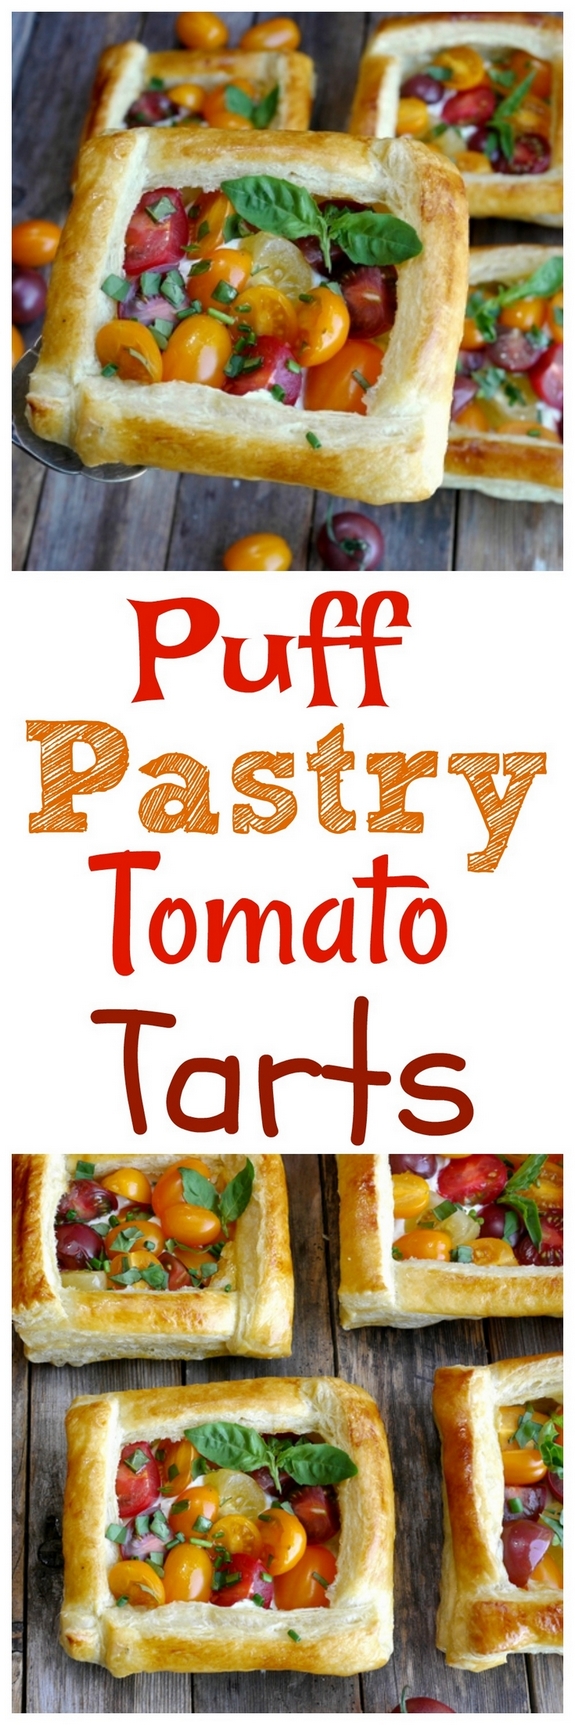 Puff Pastry Tomato Tarts from NoblePig.com.